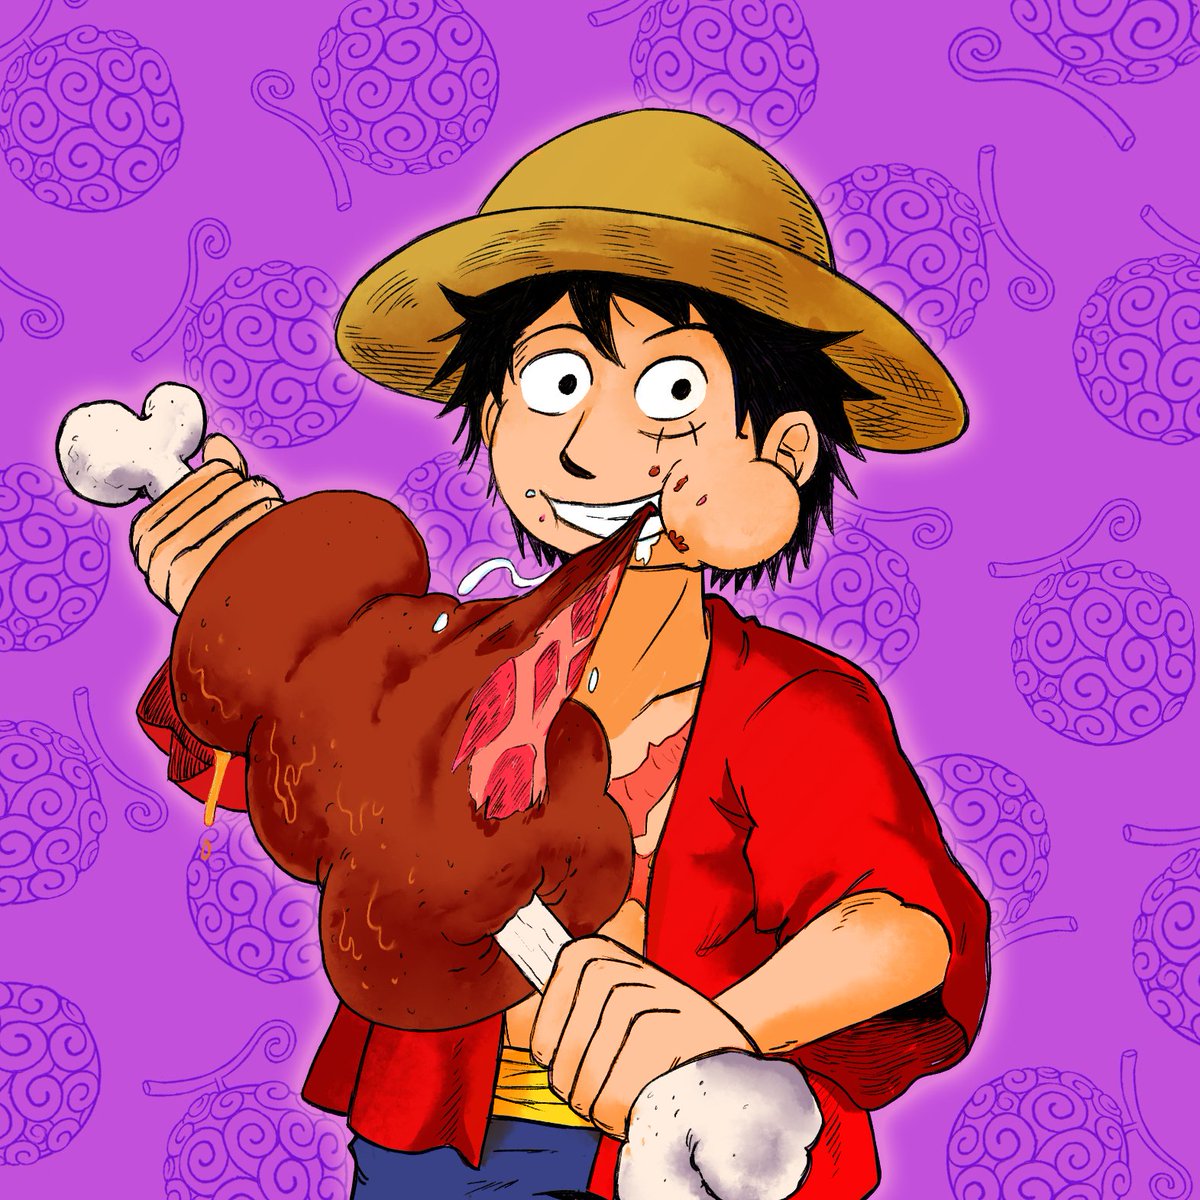 Strawhat Button Artworks (1/10): Monkey D. Luffy!! 👒🍖
The first final render for my Strawhat Button set is complete!

#onepiece #luffy #animeart #shonenjump #devilfruit #eiichirooda #monkeydluffy #manga #food #foodart #fanart #buttonart #onepiecemanga #piratefanart #digitalart